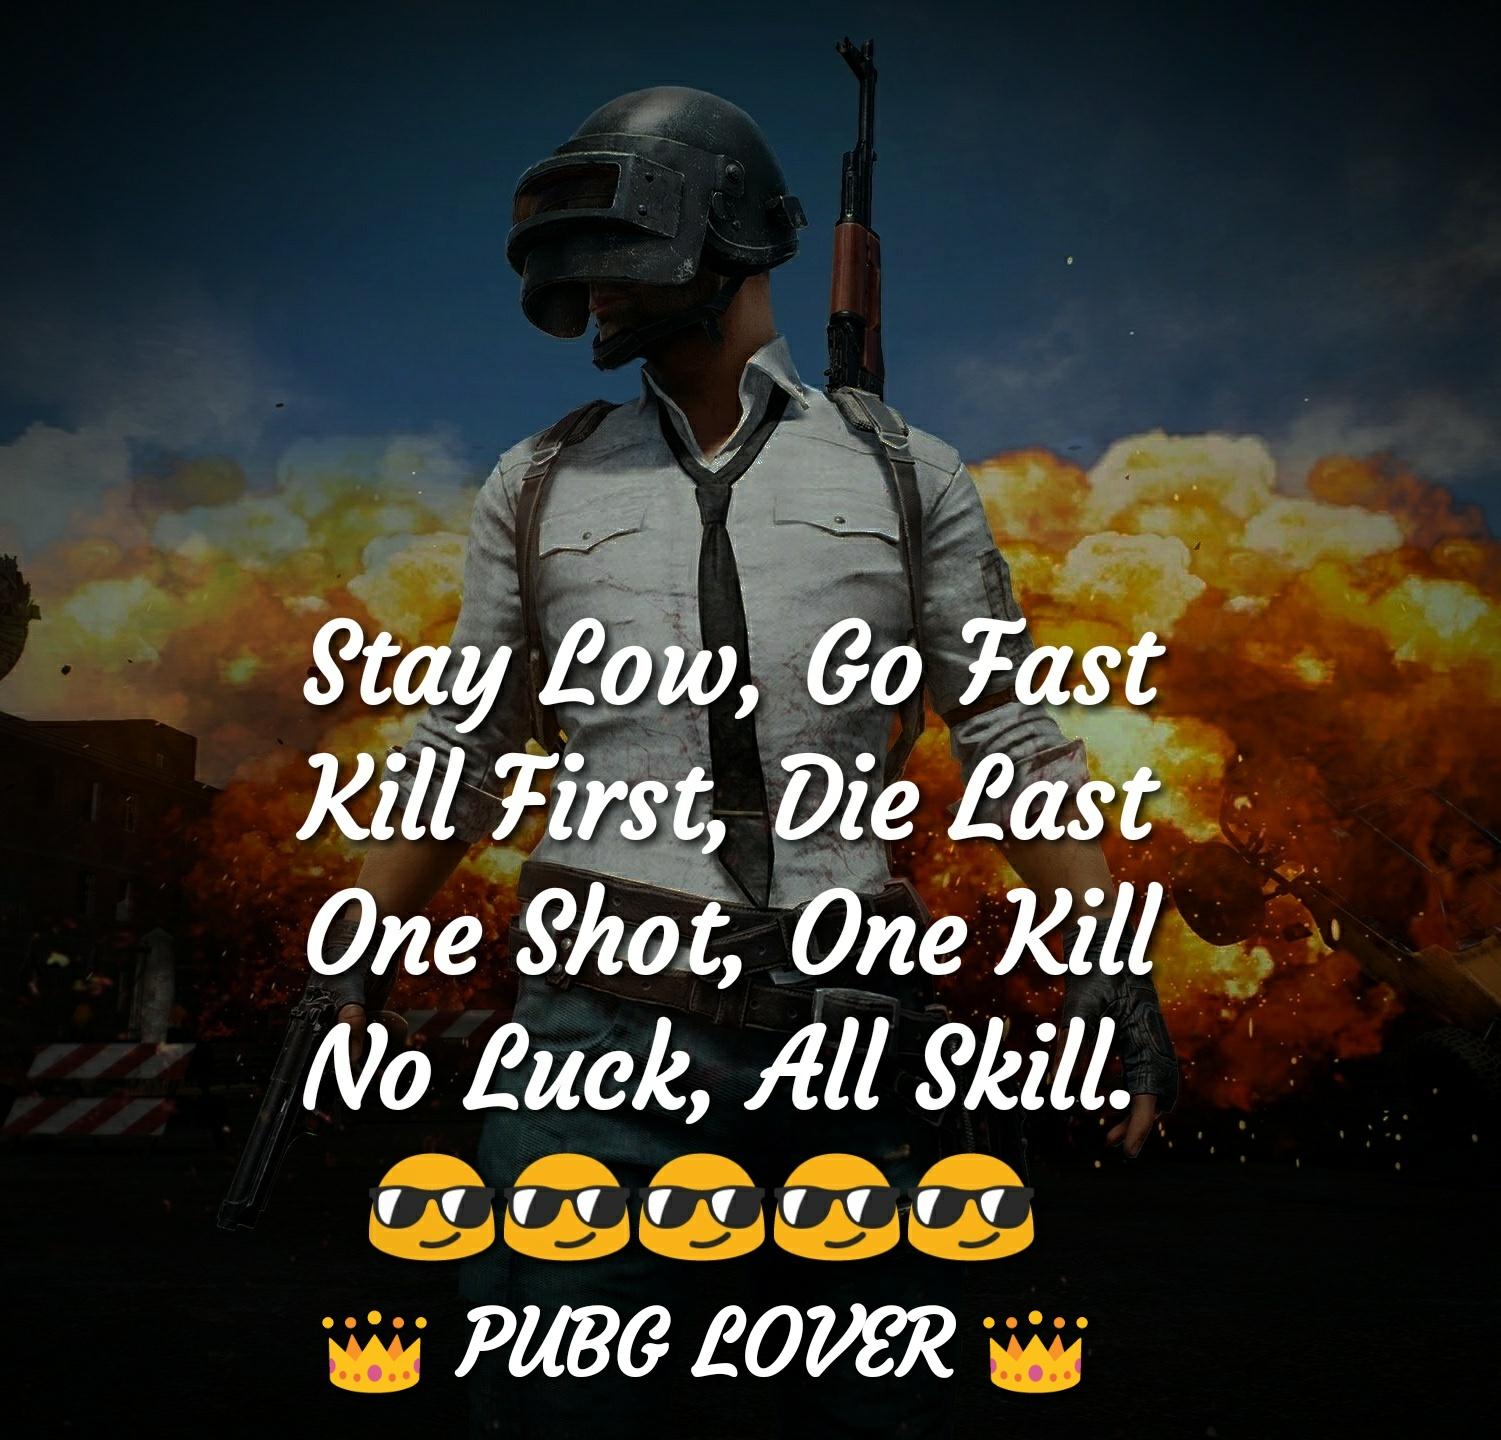 Pubg Lover Pic HD Free With Xbox One X